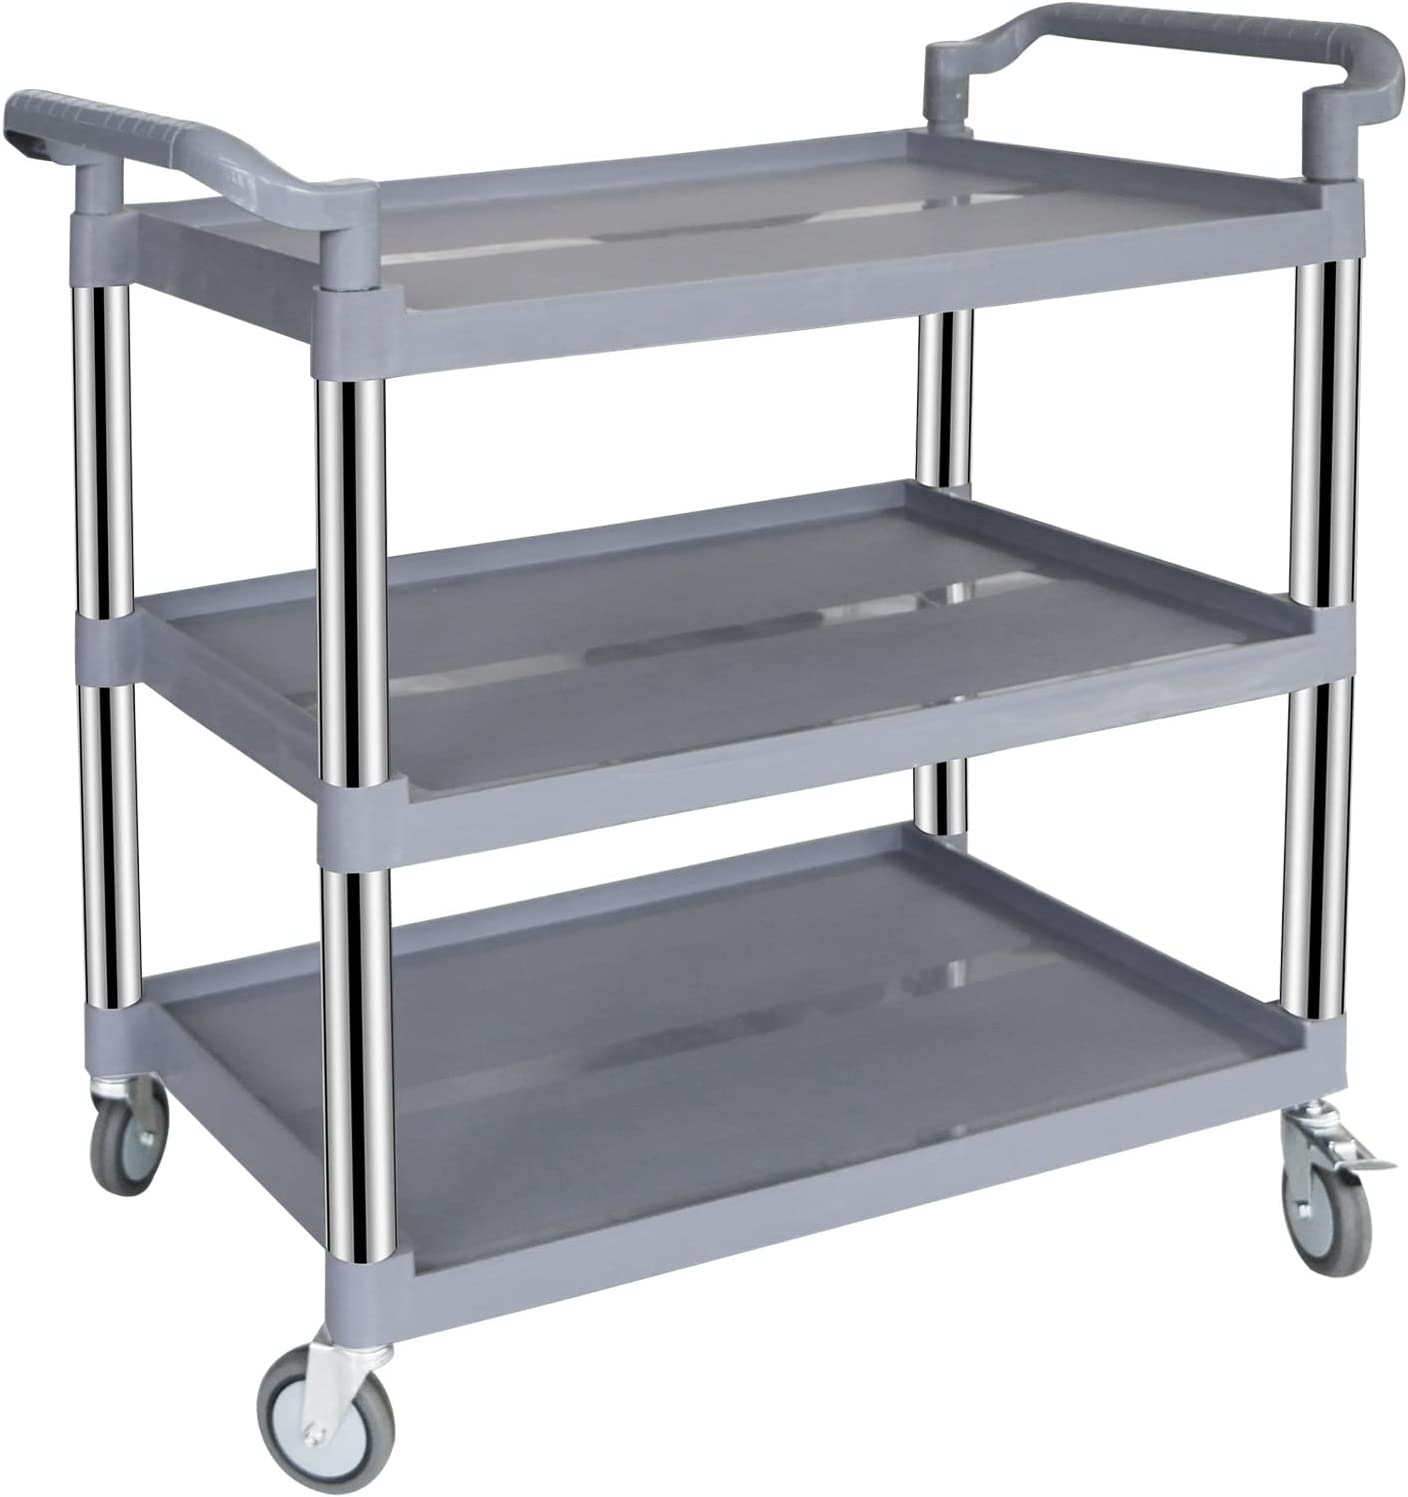 UNICOO Plastic Heavy Duty Utility Cart-550 Pound, 3-Tier Service Cart, Restaurant Cart with Wheels Lockable 41X19.5X 39 inches - Large Size